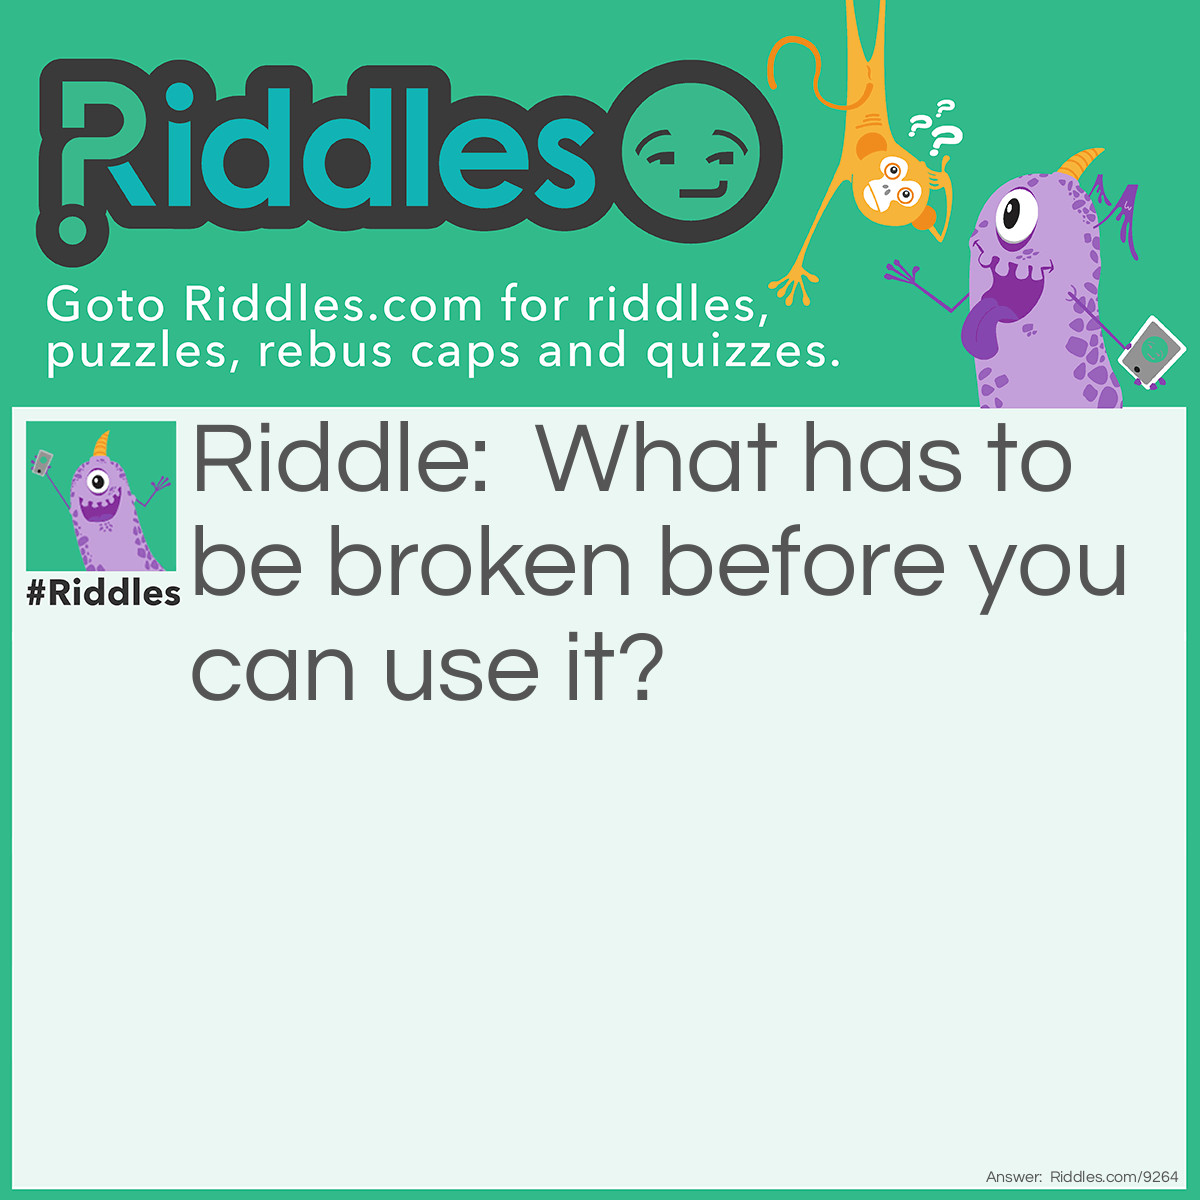 Riddle: What has to be broken before you can use it? Answer: An Egg!